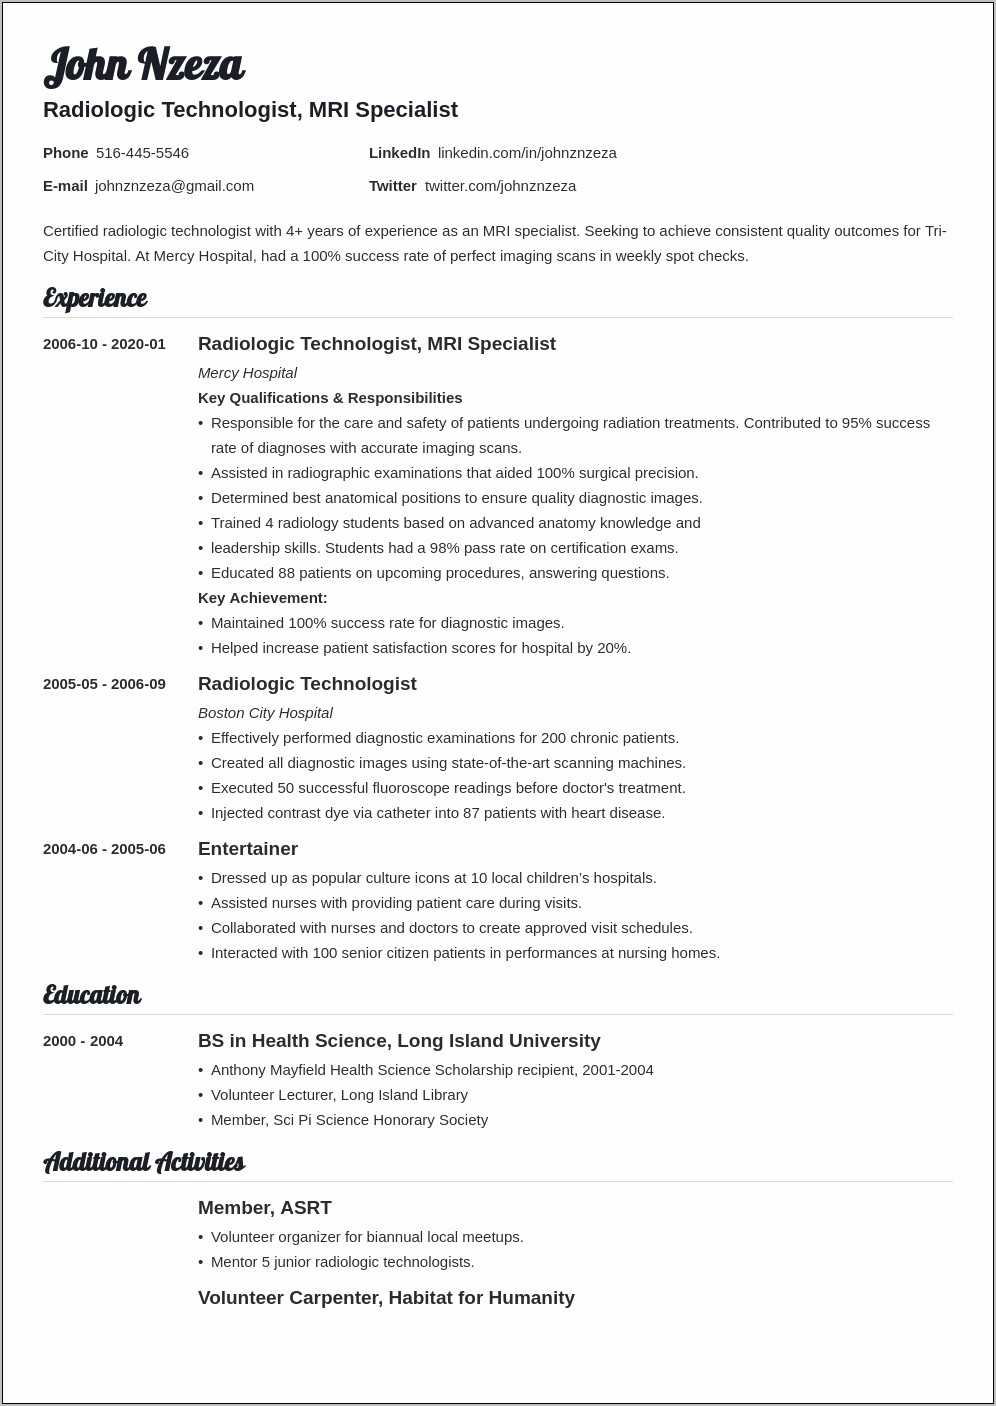 Sample Resume For Radiation Therapist Student - Resume Example Gallery